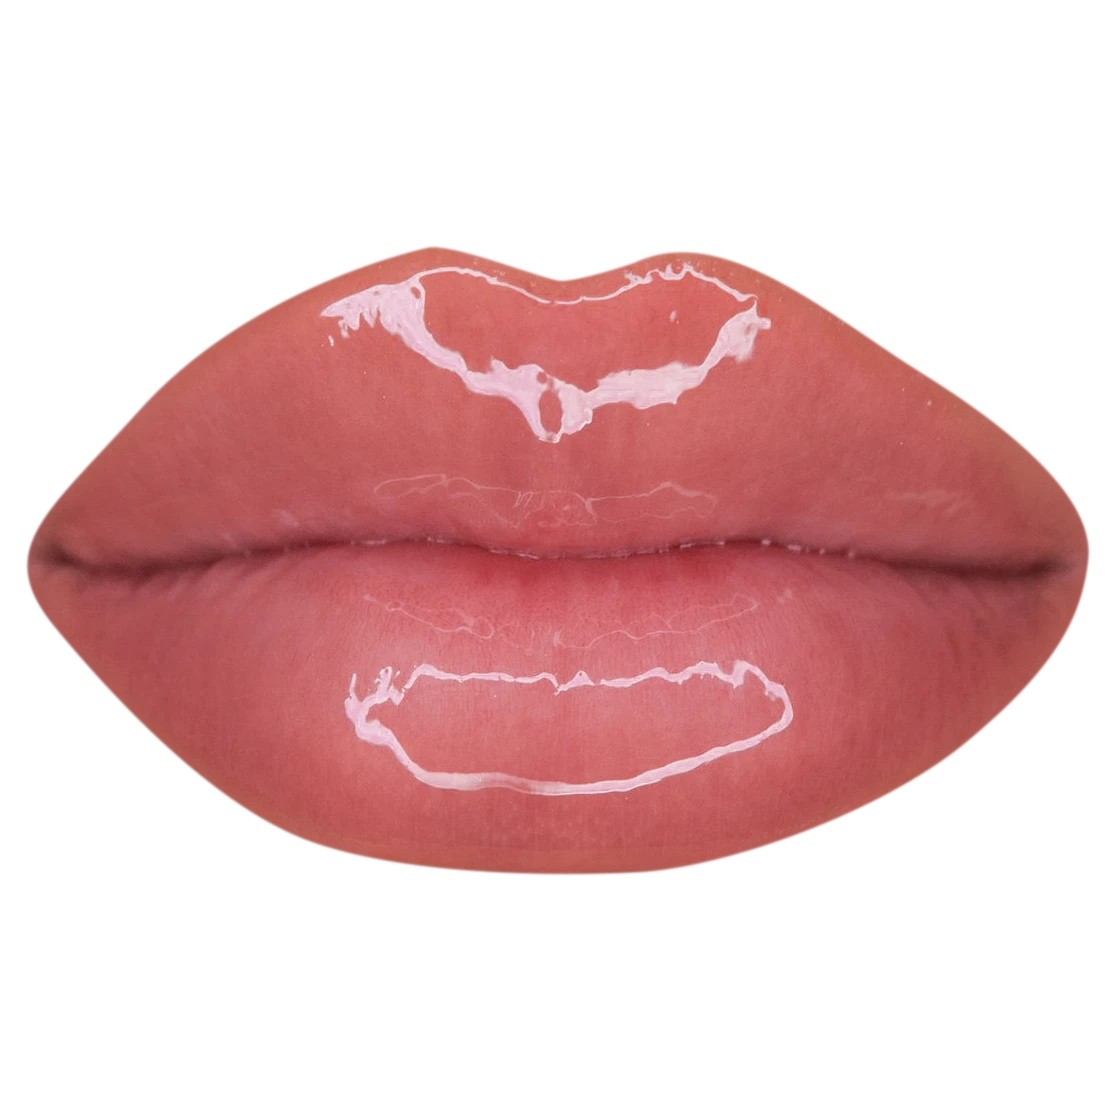 Download Free PNG Photo Images & Clipart of Lips